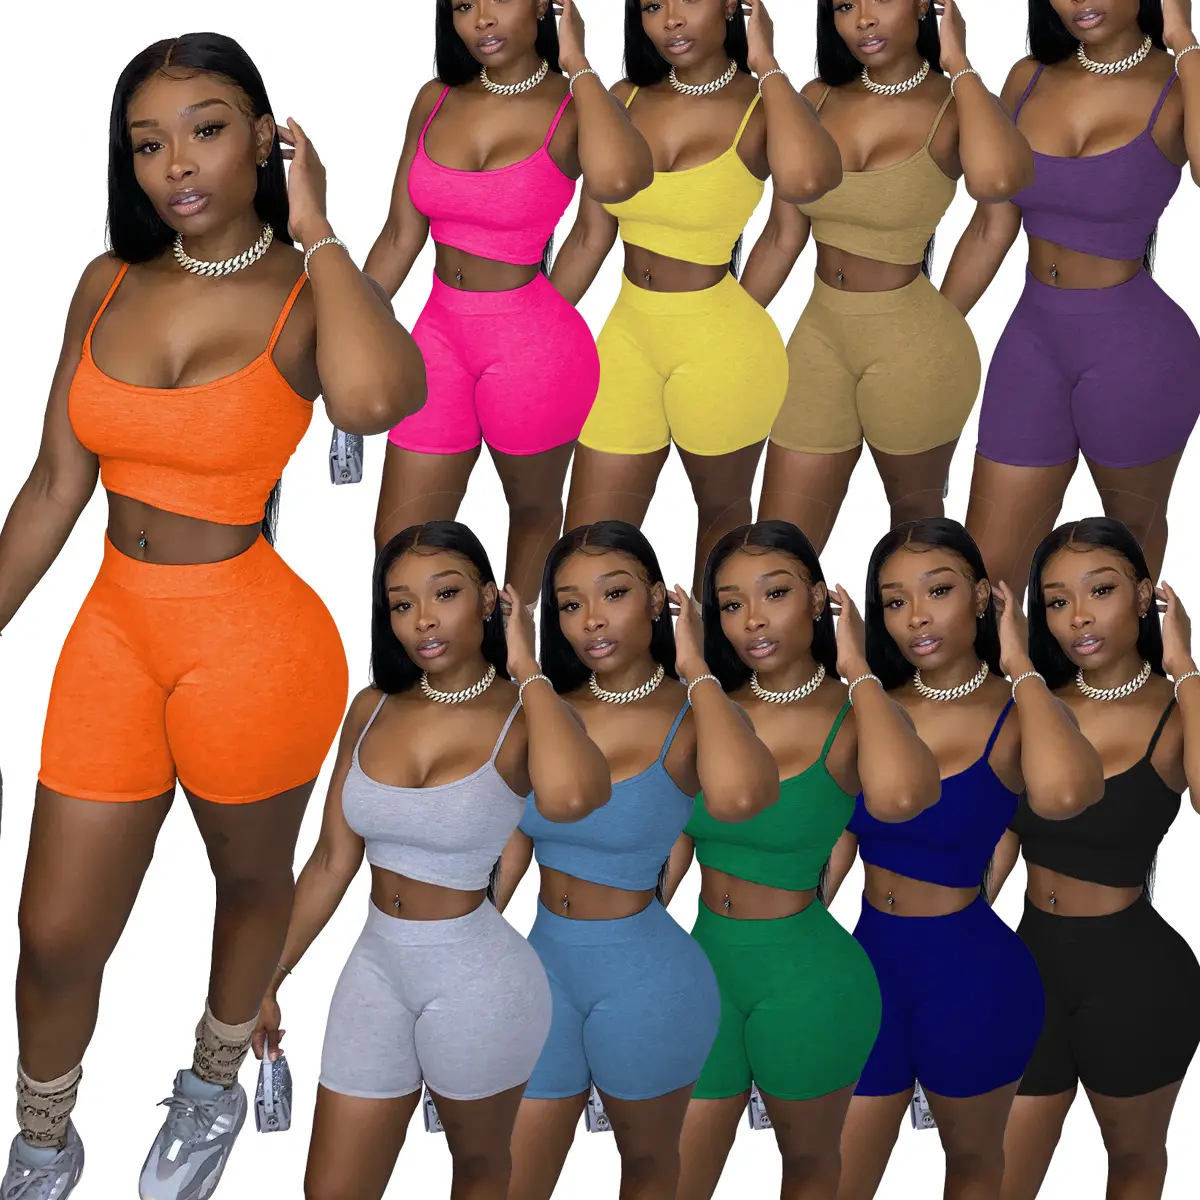 10 Colors Girls' T-Shirts And Biker Shorts Set Shirts For Women Plain Tank Crop Top and Skinny Booty Shorts For Women